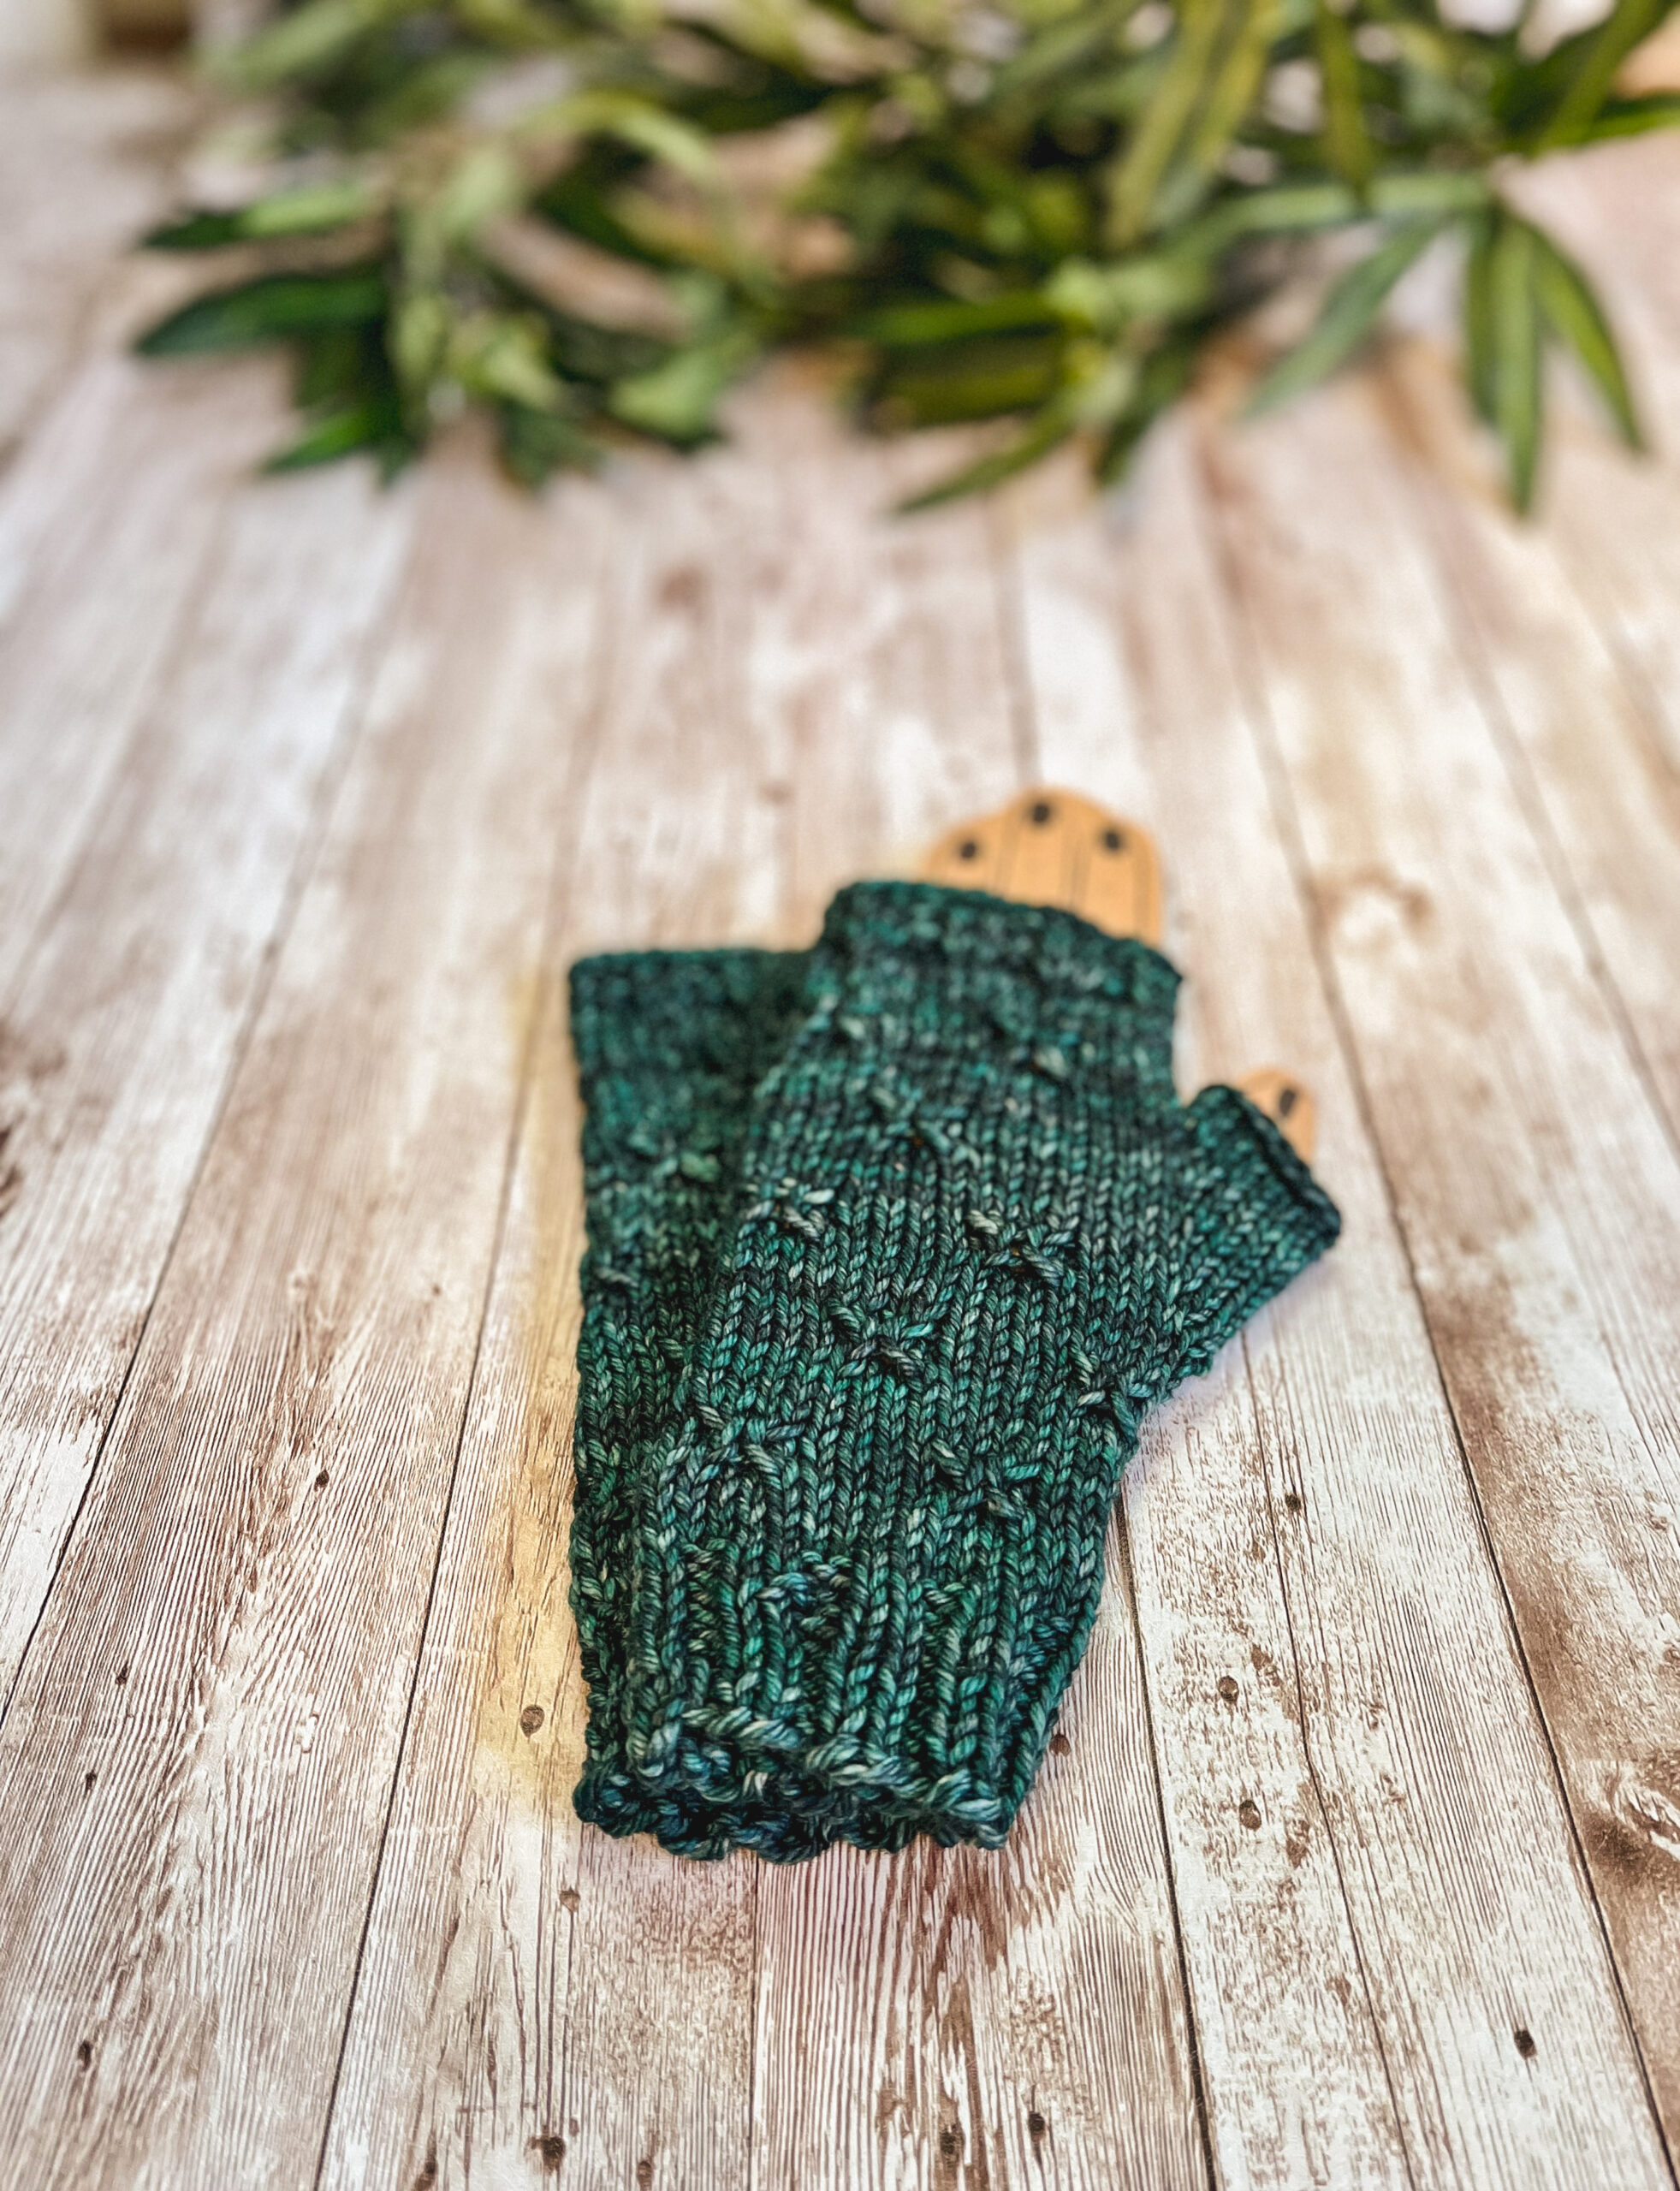 A pair of green fingerless mitts with a decorative gathered pattern sit on a wood plank with greenery in the background